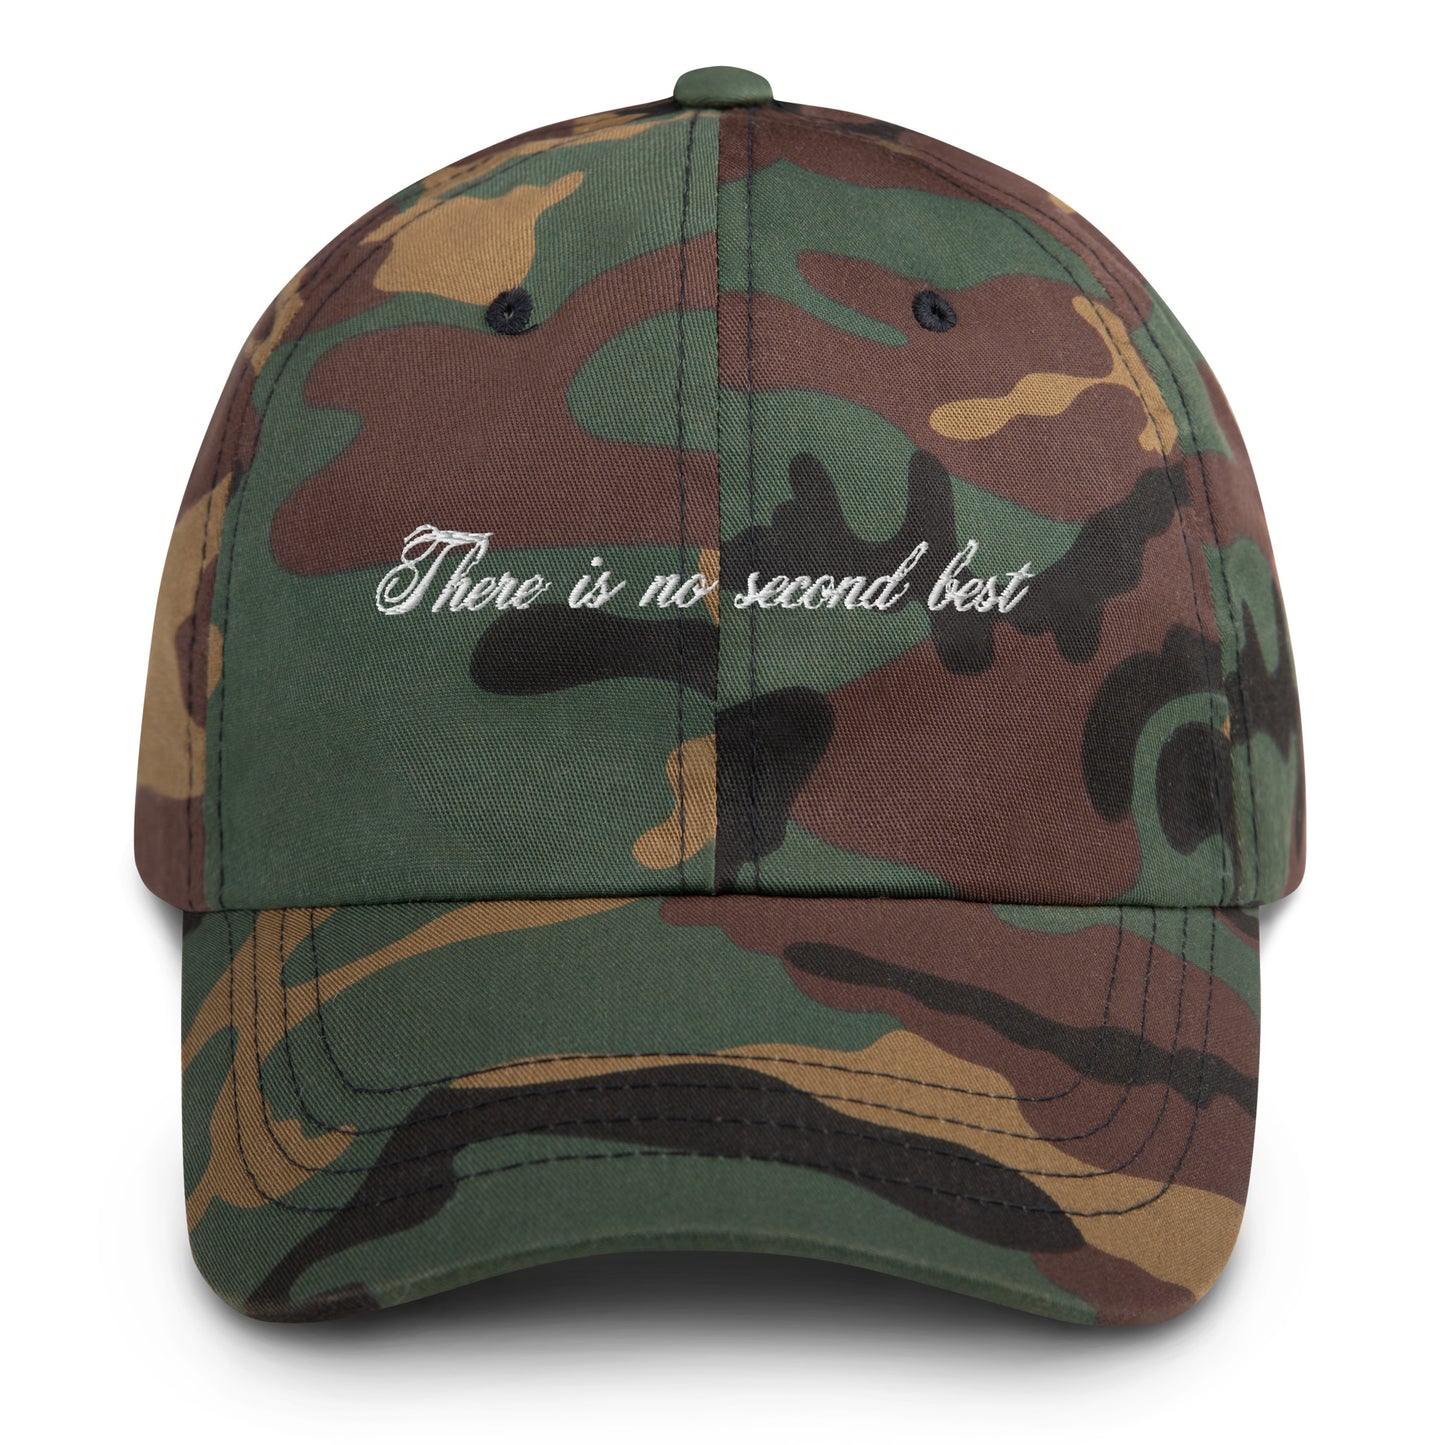 There is no second best cap, embroidered